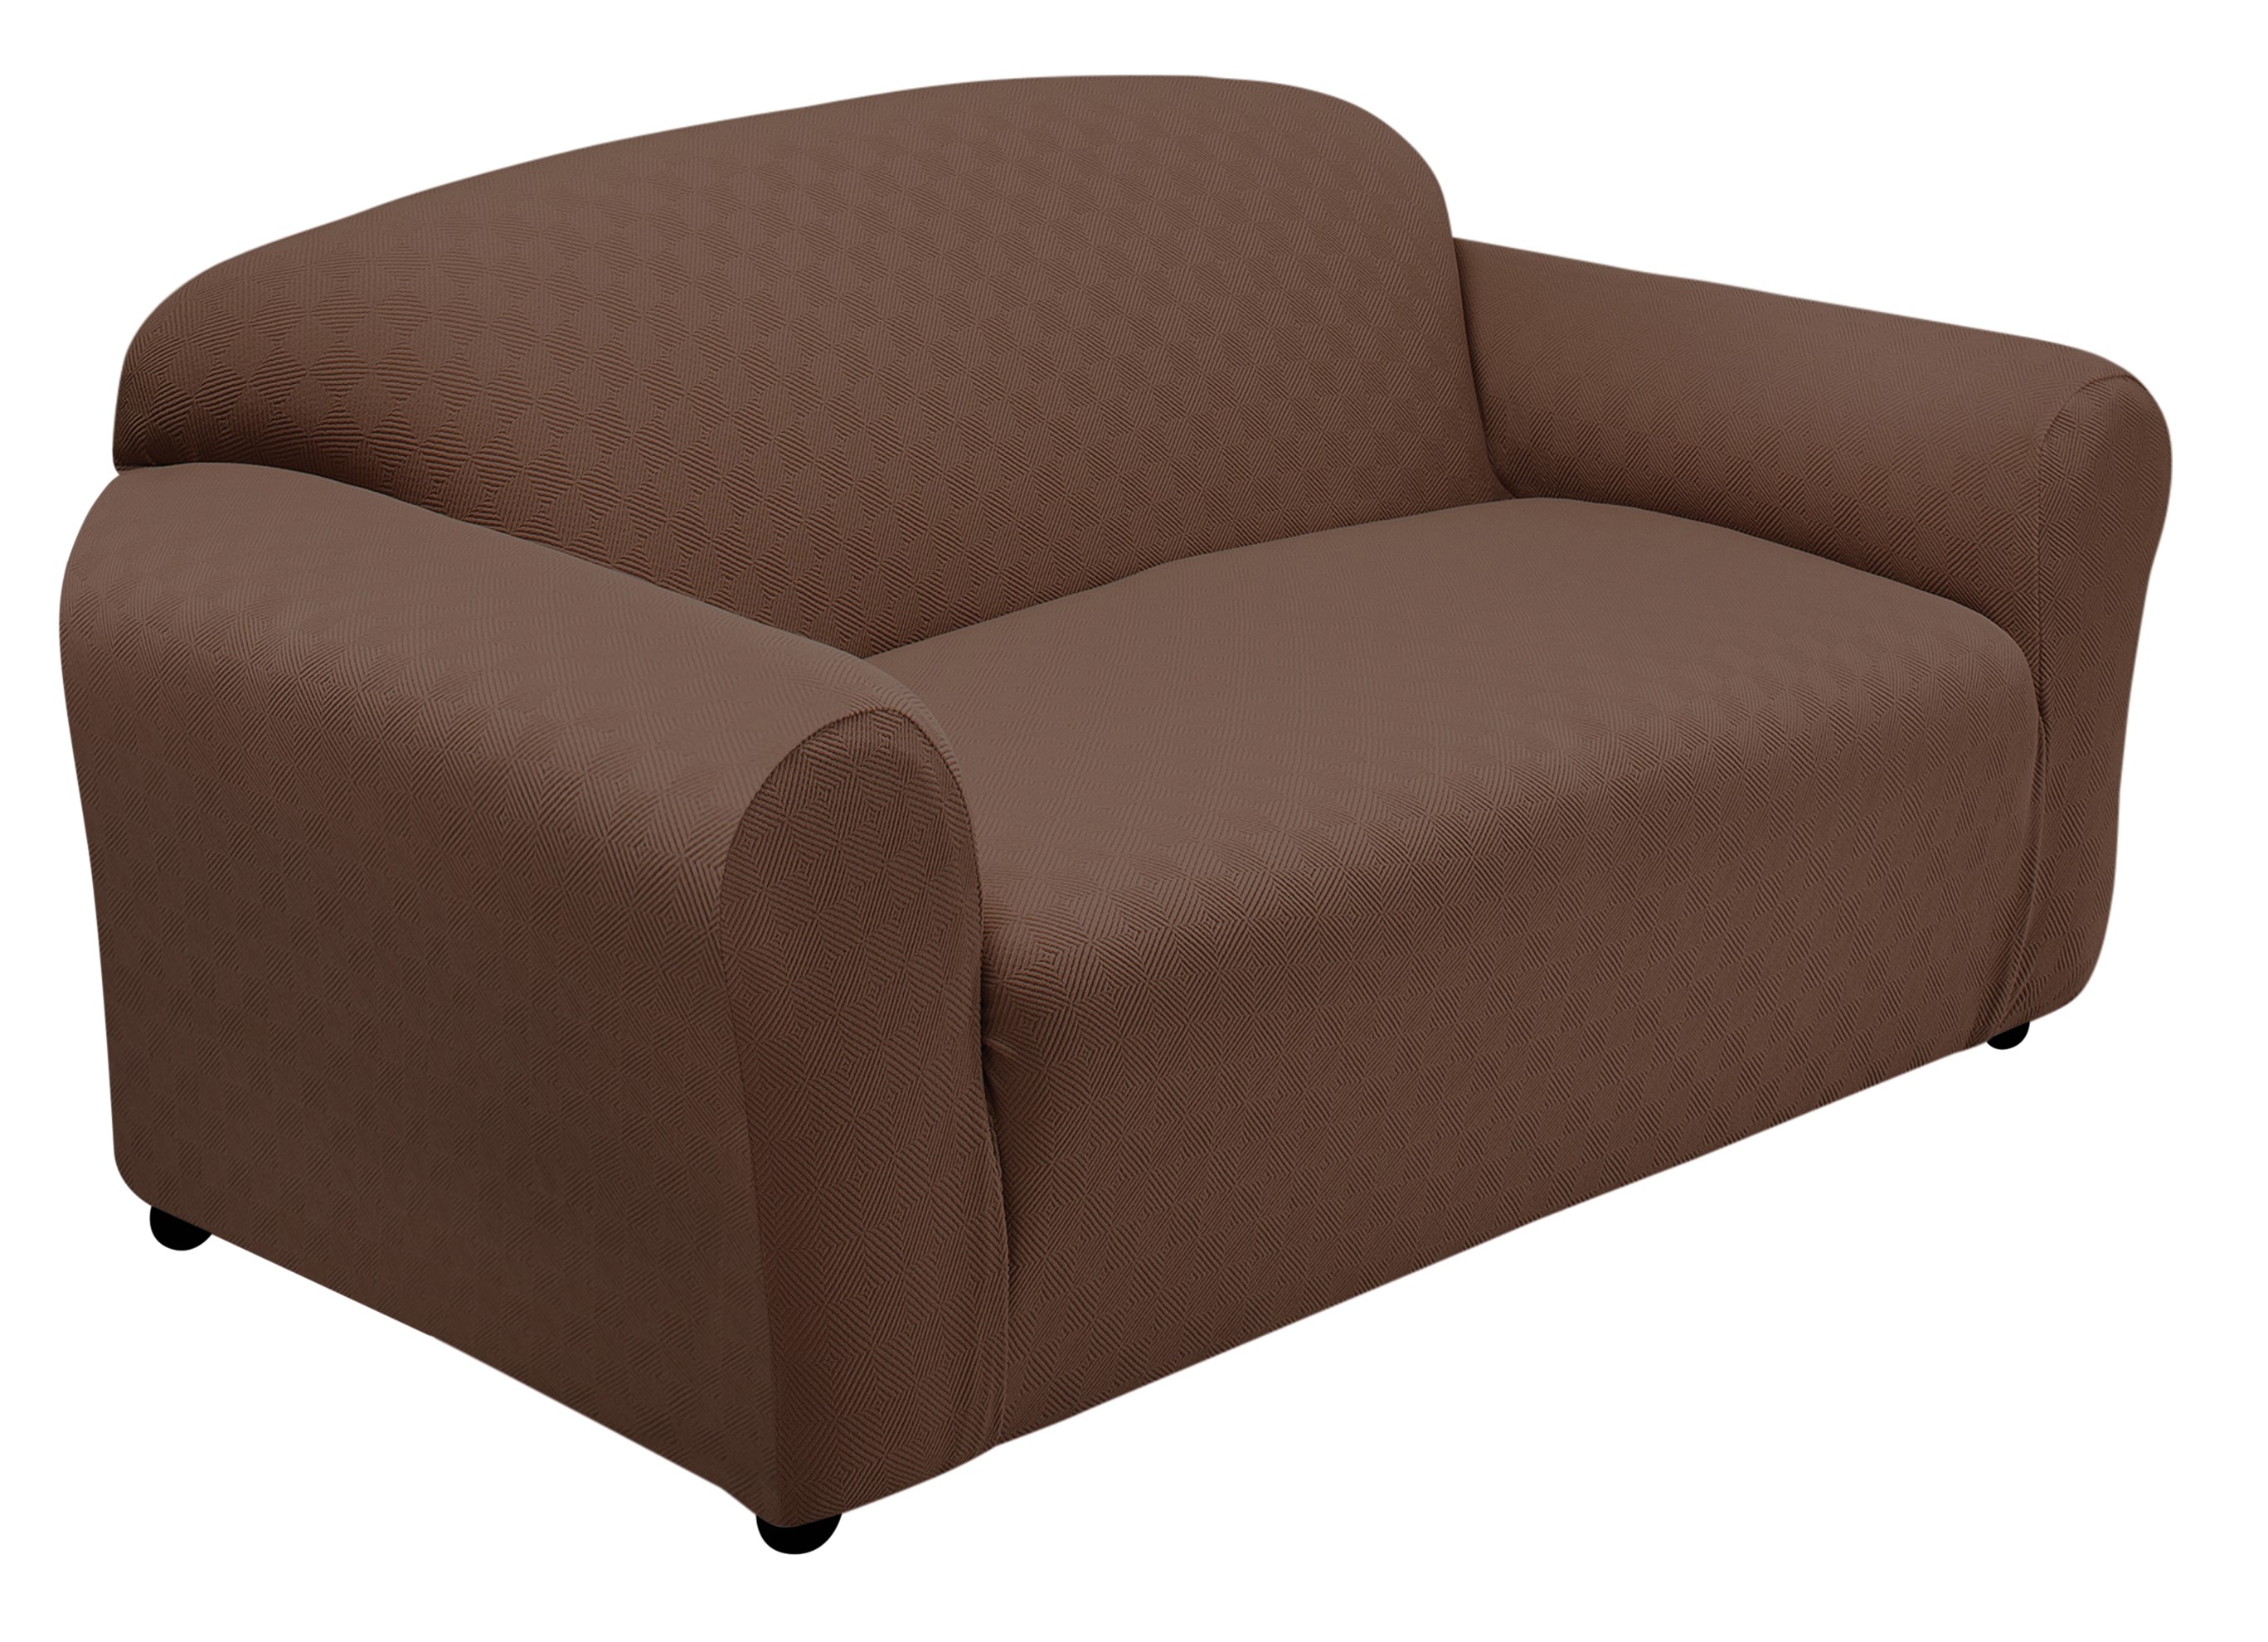 Stretch Sensations 1-Piece Stretch Newport Loveseat Slipcover, Cocoa - image 1 of 7